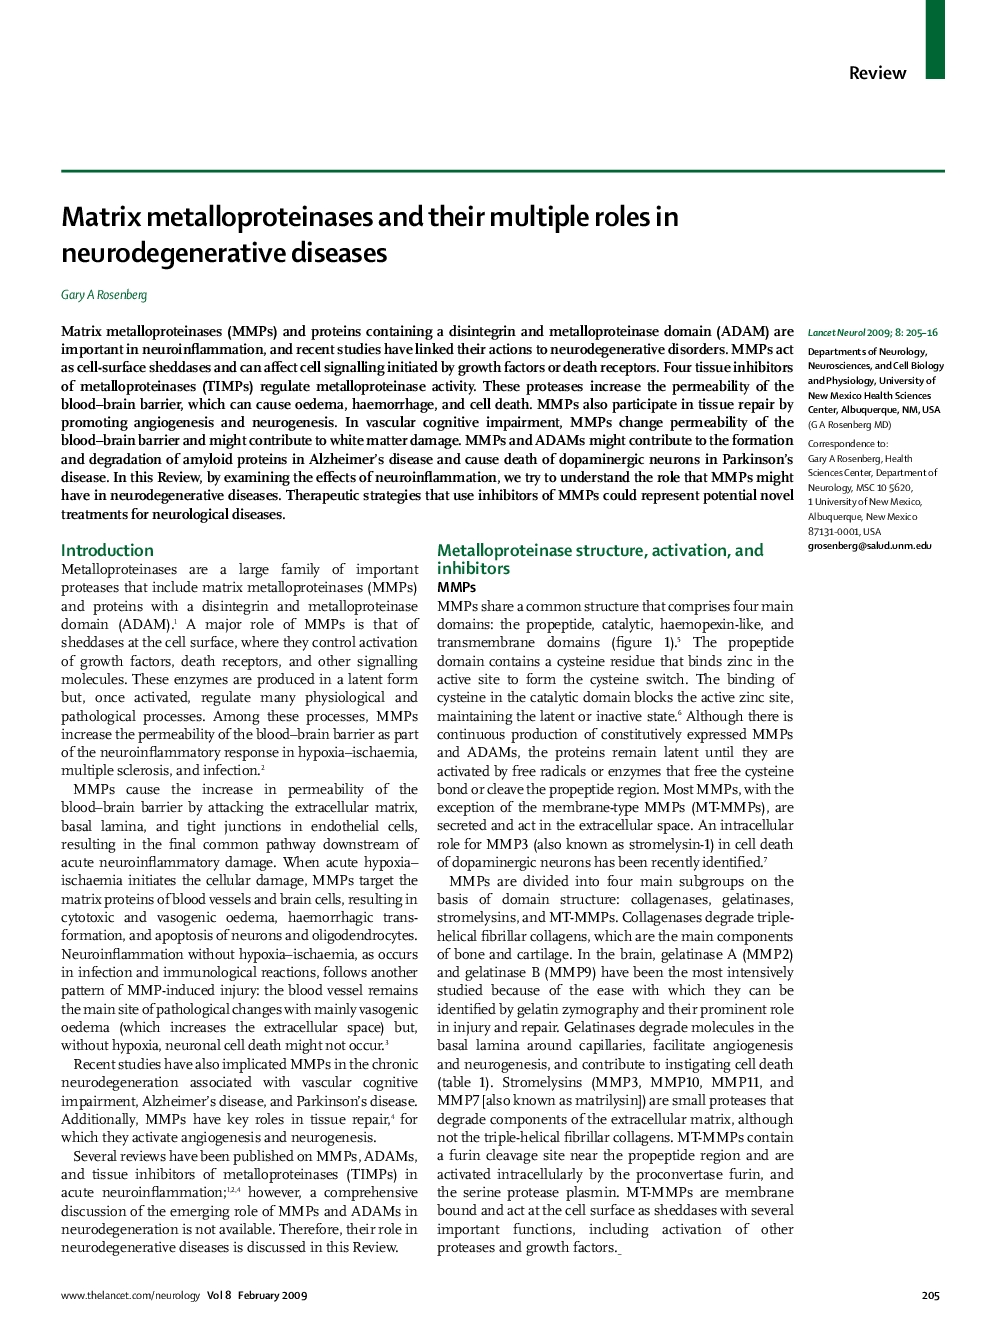 Matrix metalloproteinases and their multiple roles in neurodegenerative diseases